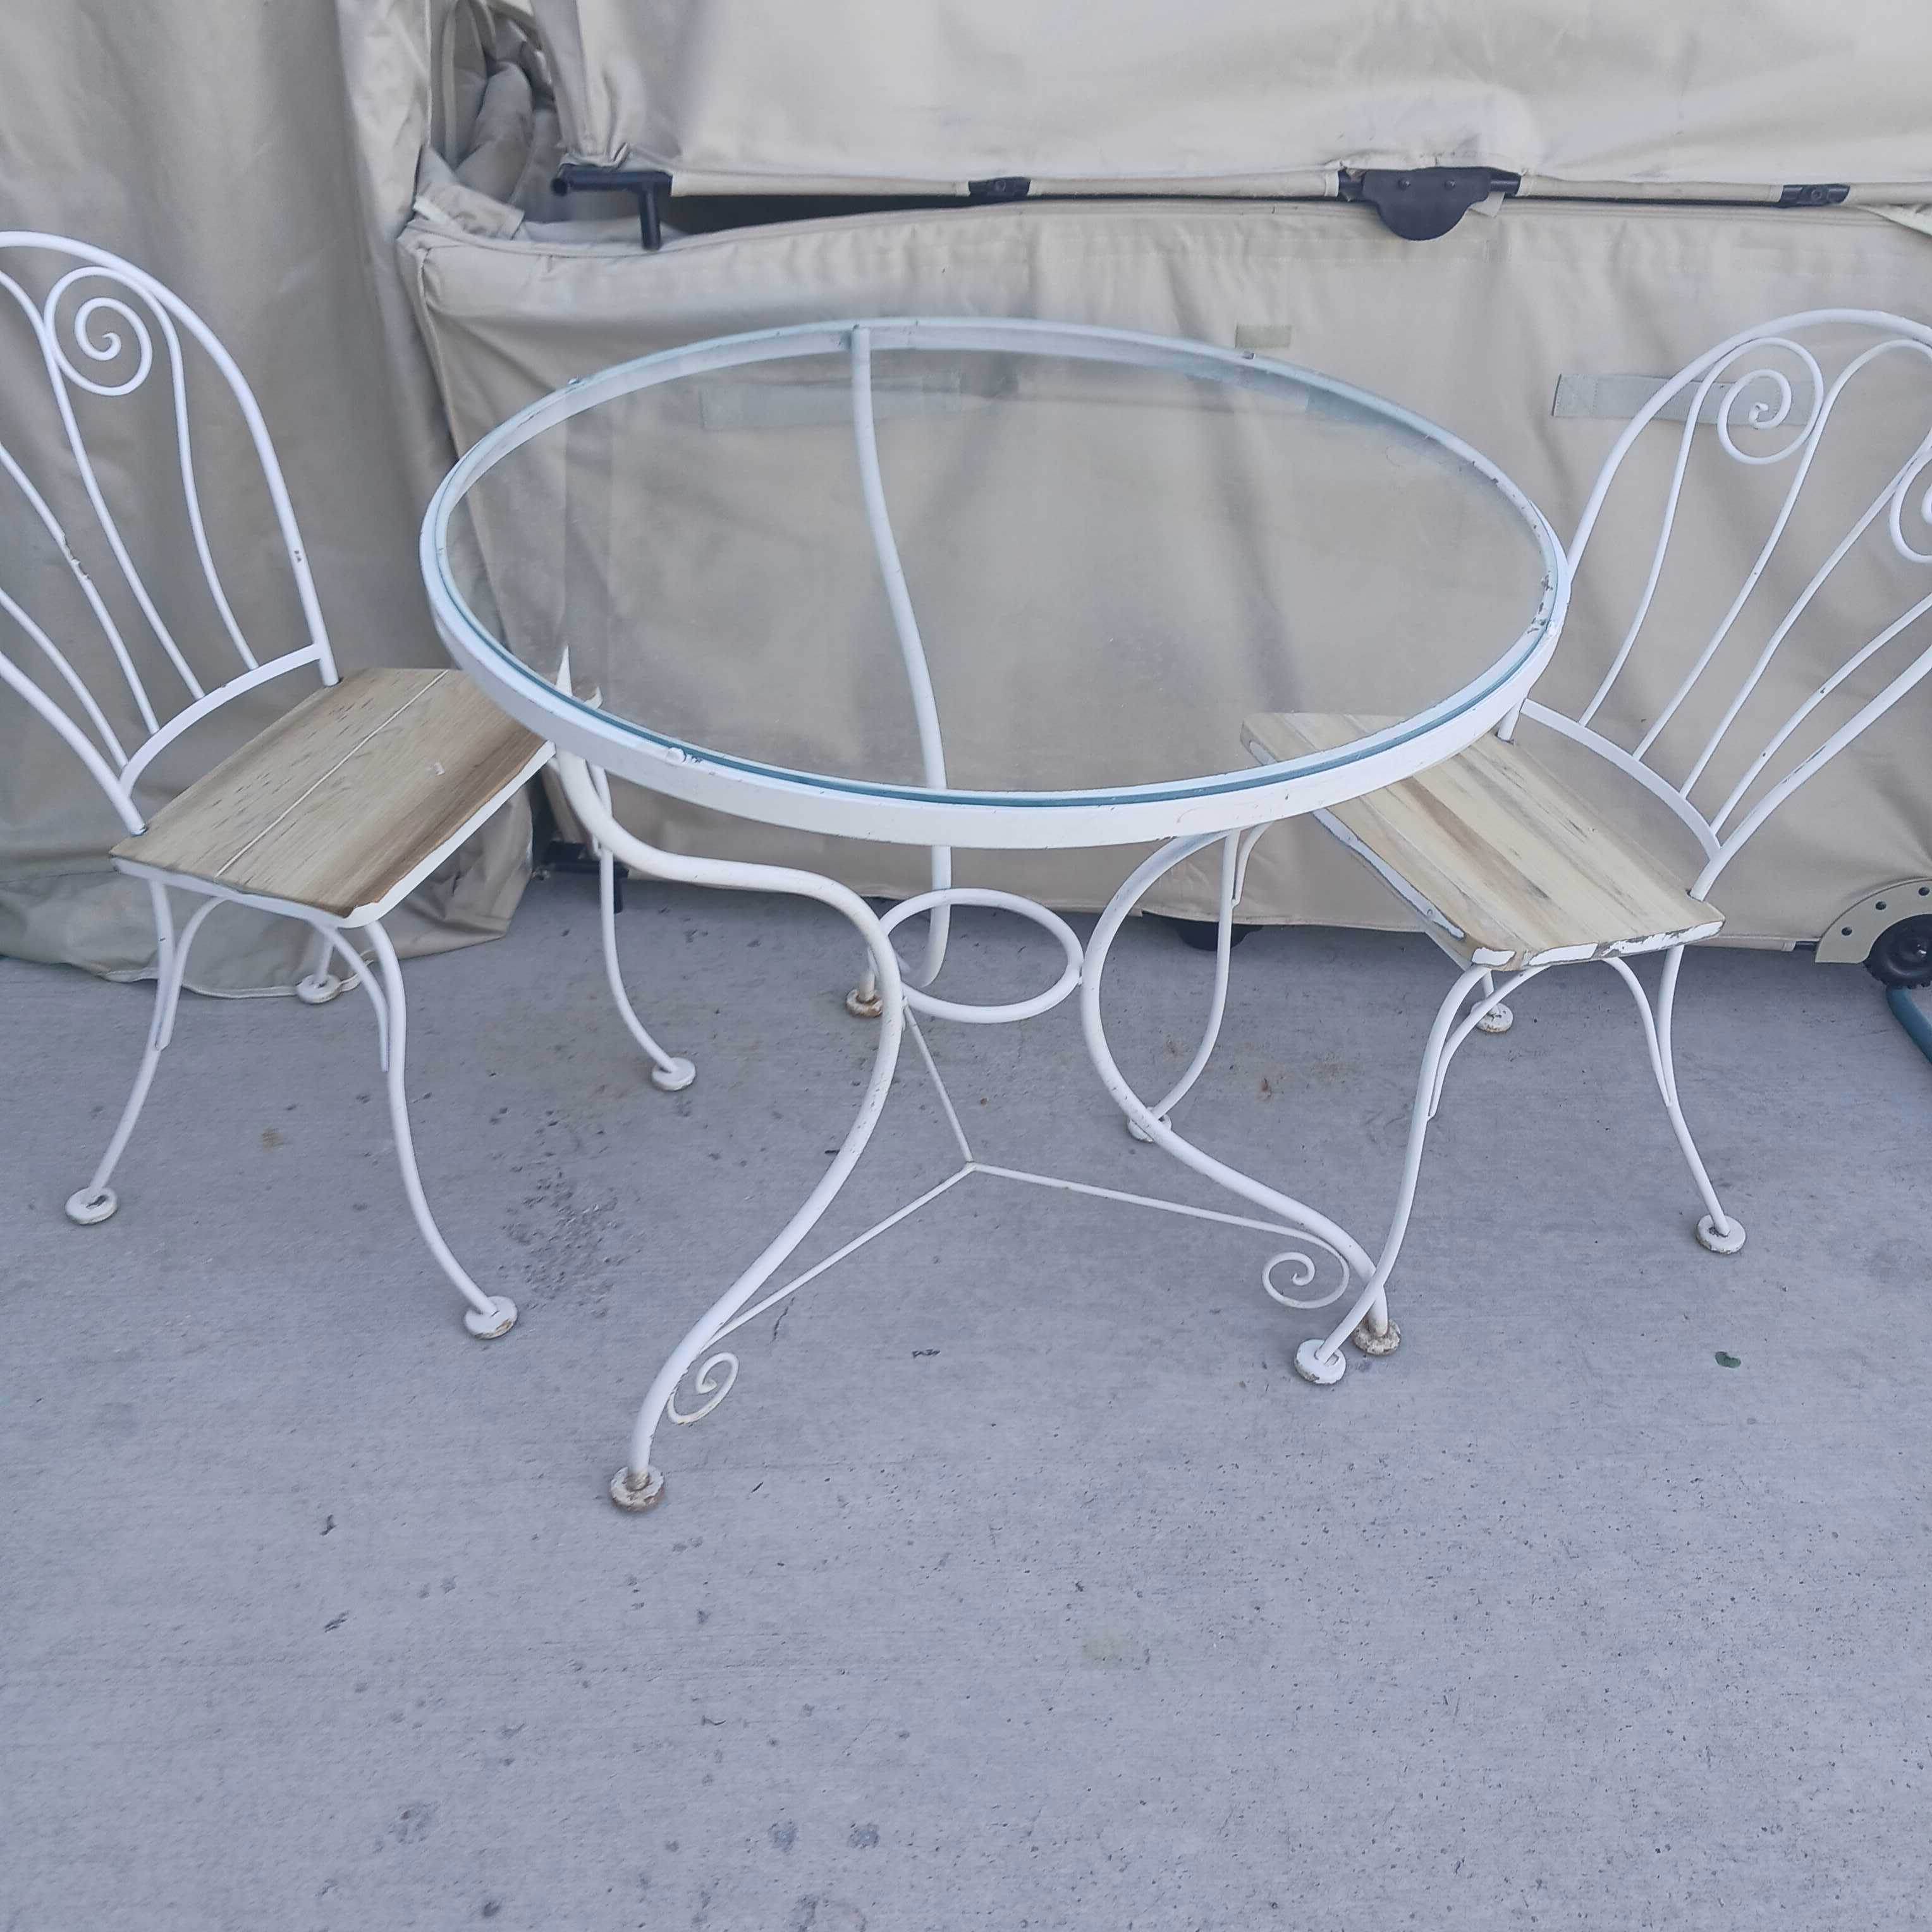 White Metal Glass Top Table with Chairs Patio Set